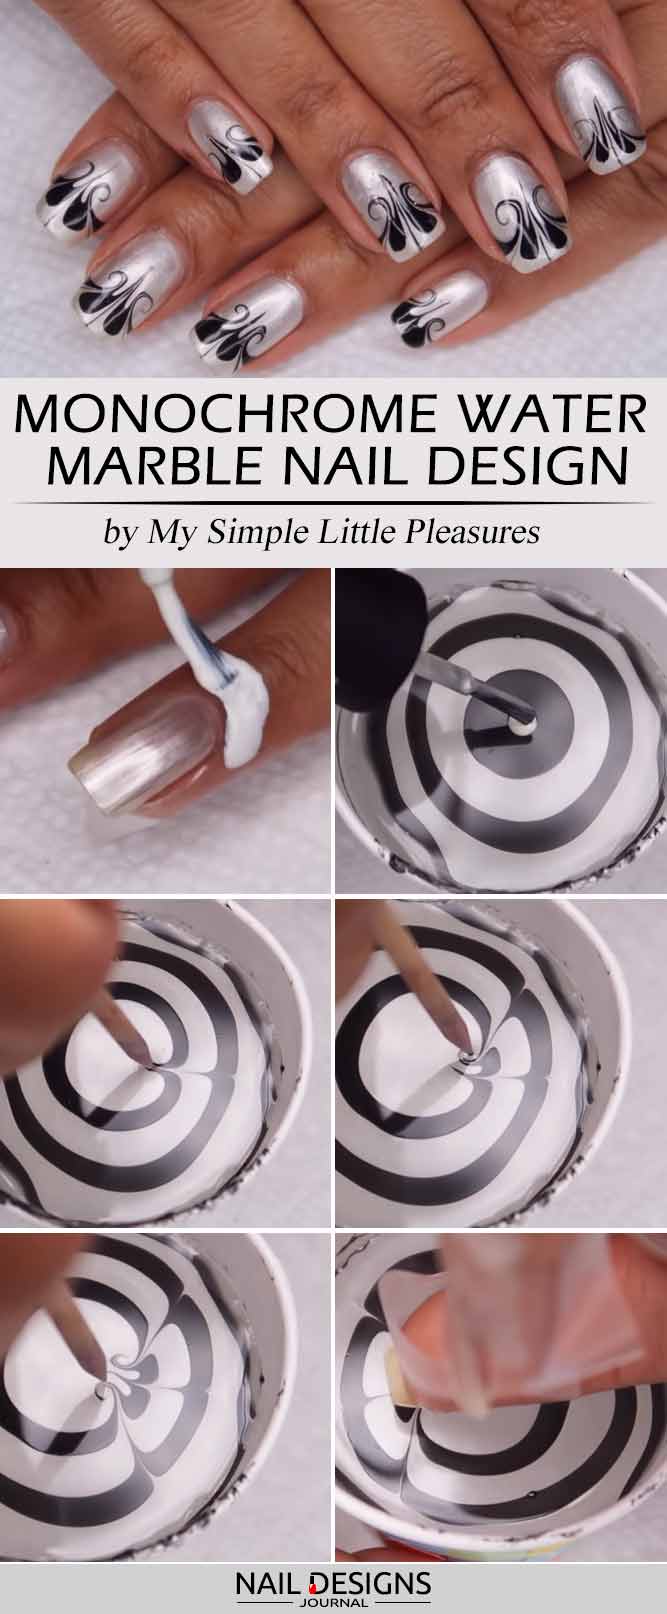 Monochrome Water Marble Nail Design